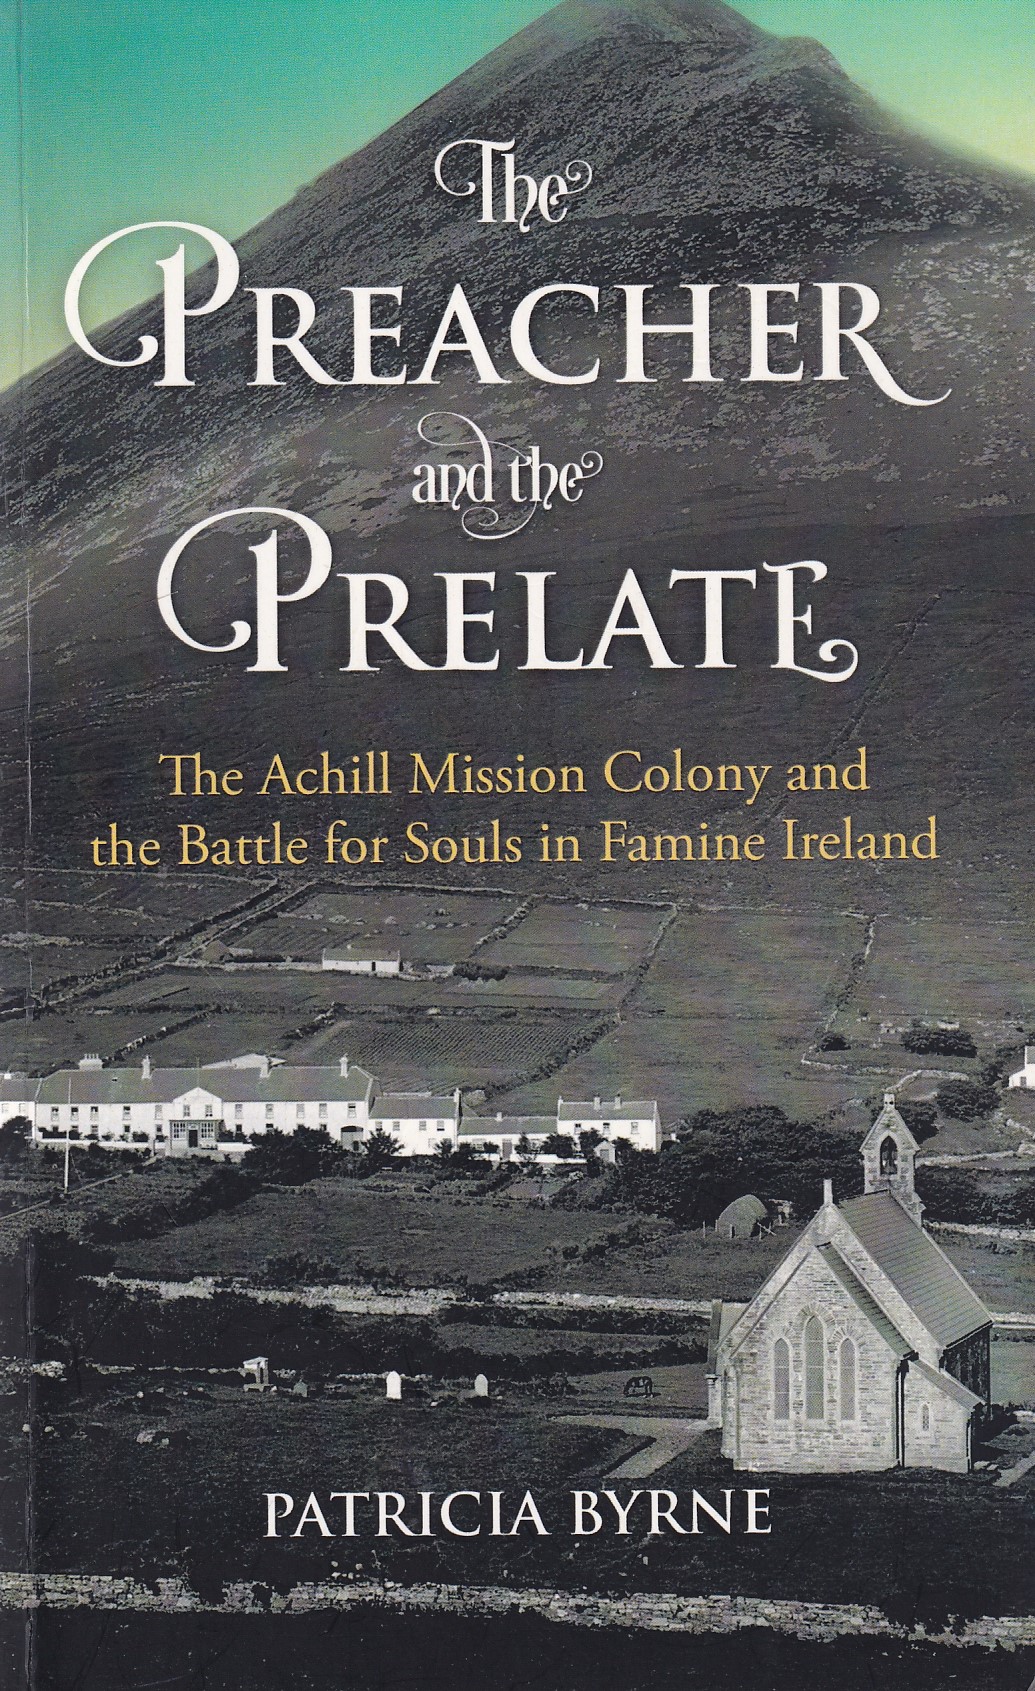 The Preacher and the Prelate: The Achill Mission Colony and the Battle for Souls in Famine Ireland [Signed] by Patricia Byrne